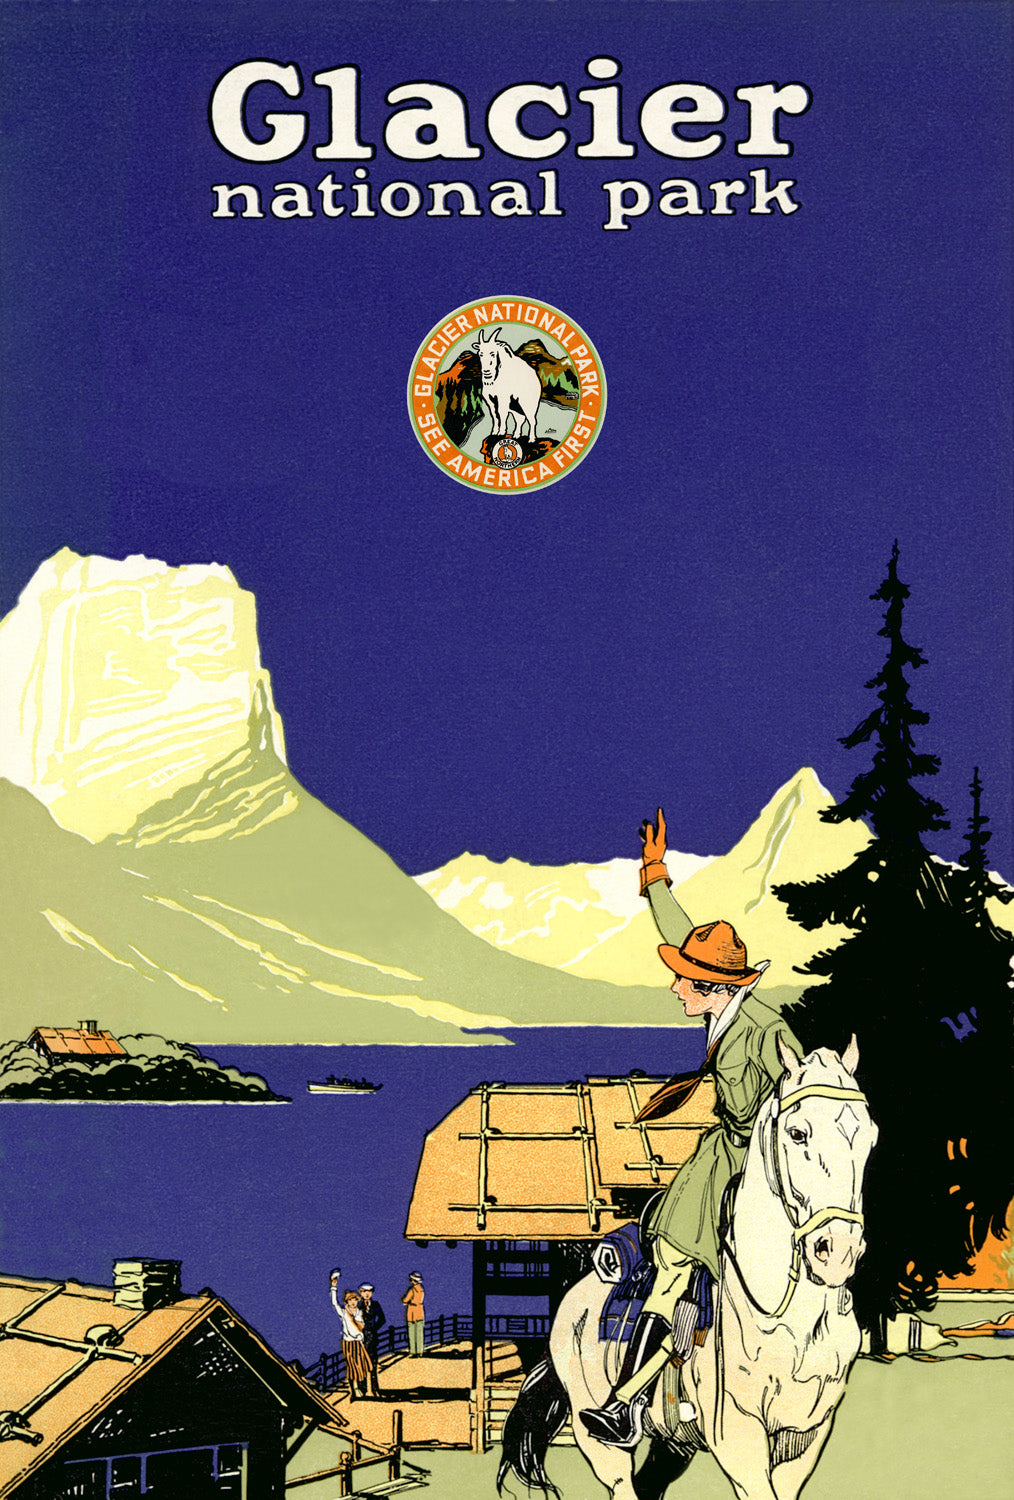 Glacier National Park: Girl on Horse 1 - ca. 1924 Lithograph